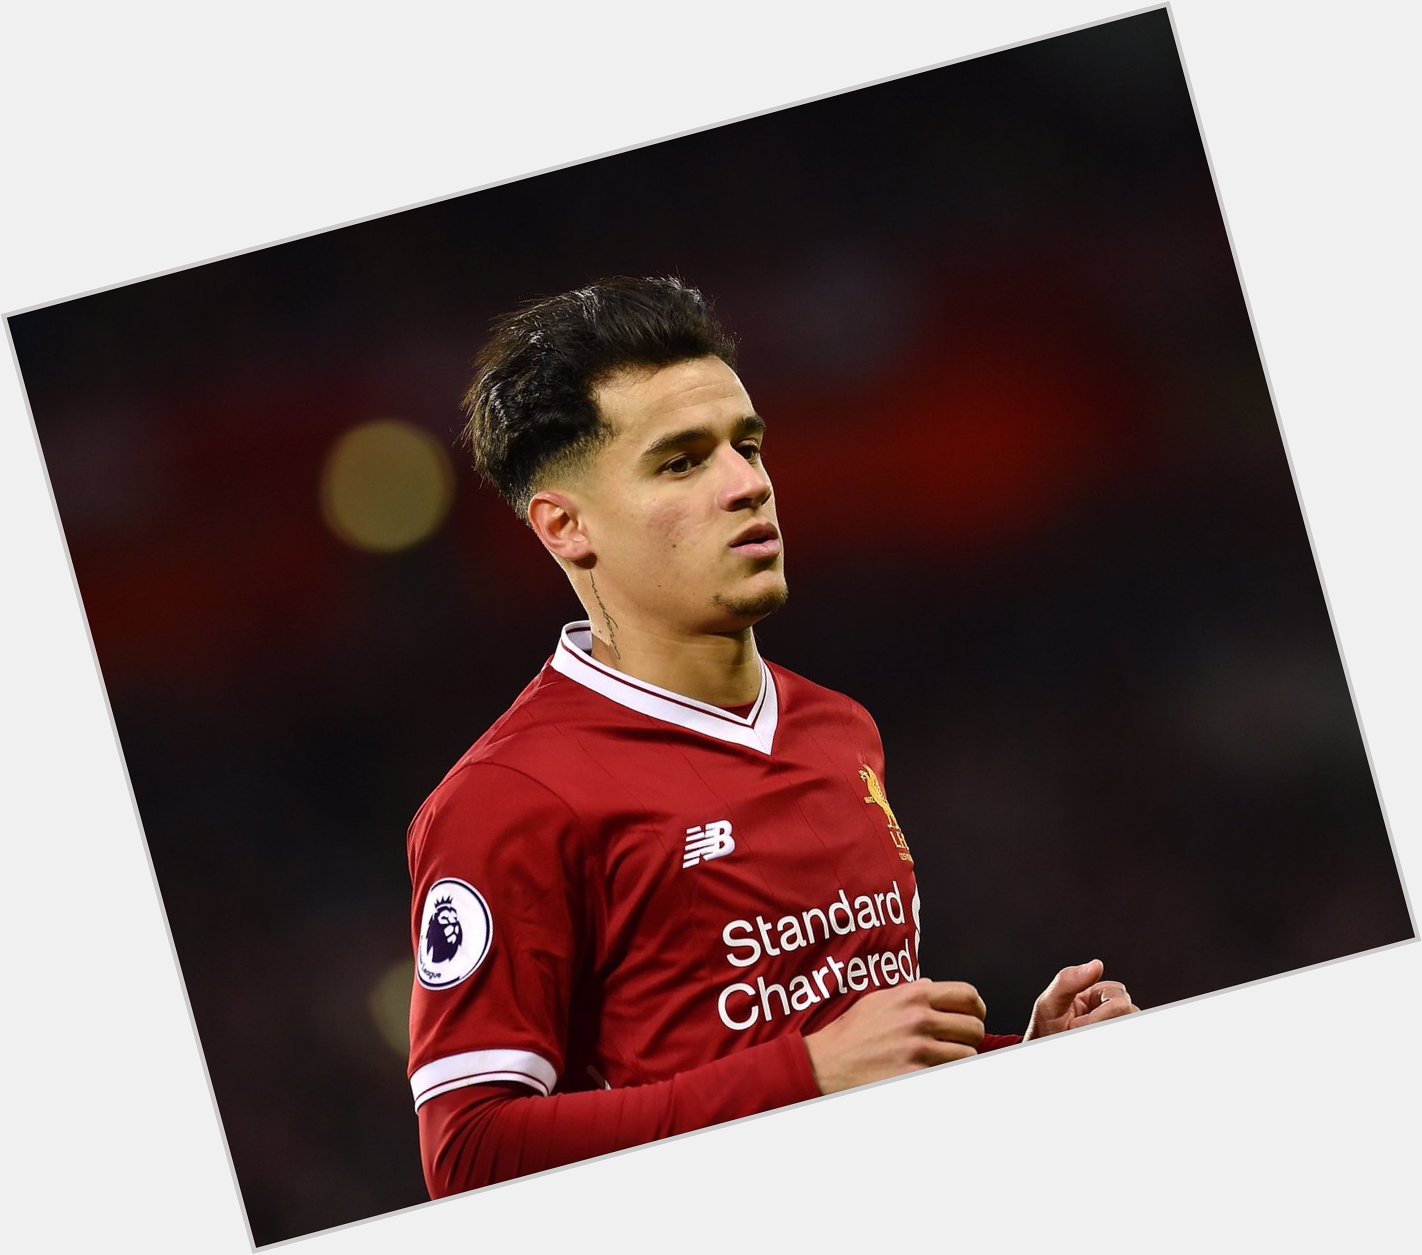 Happy birthday to my ex Philippe Coutinho, hope the Champions League was a nice present for you  